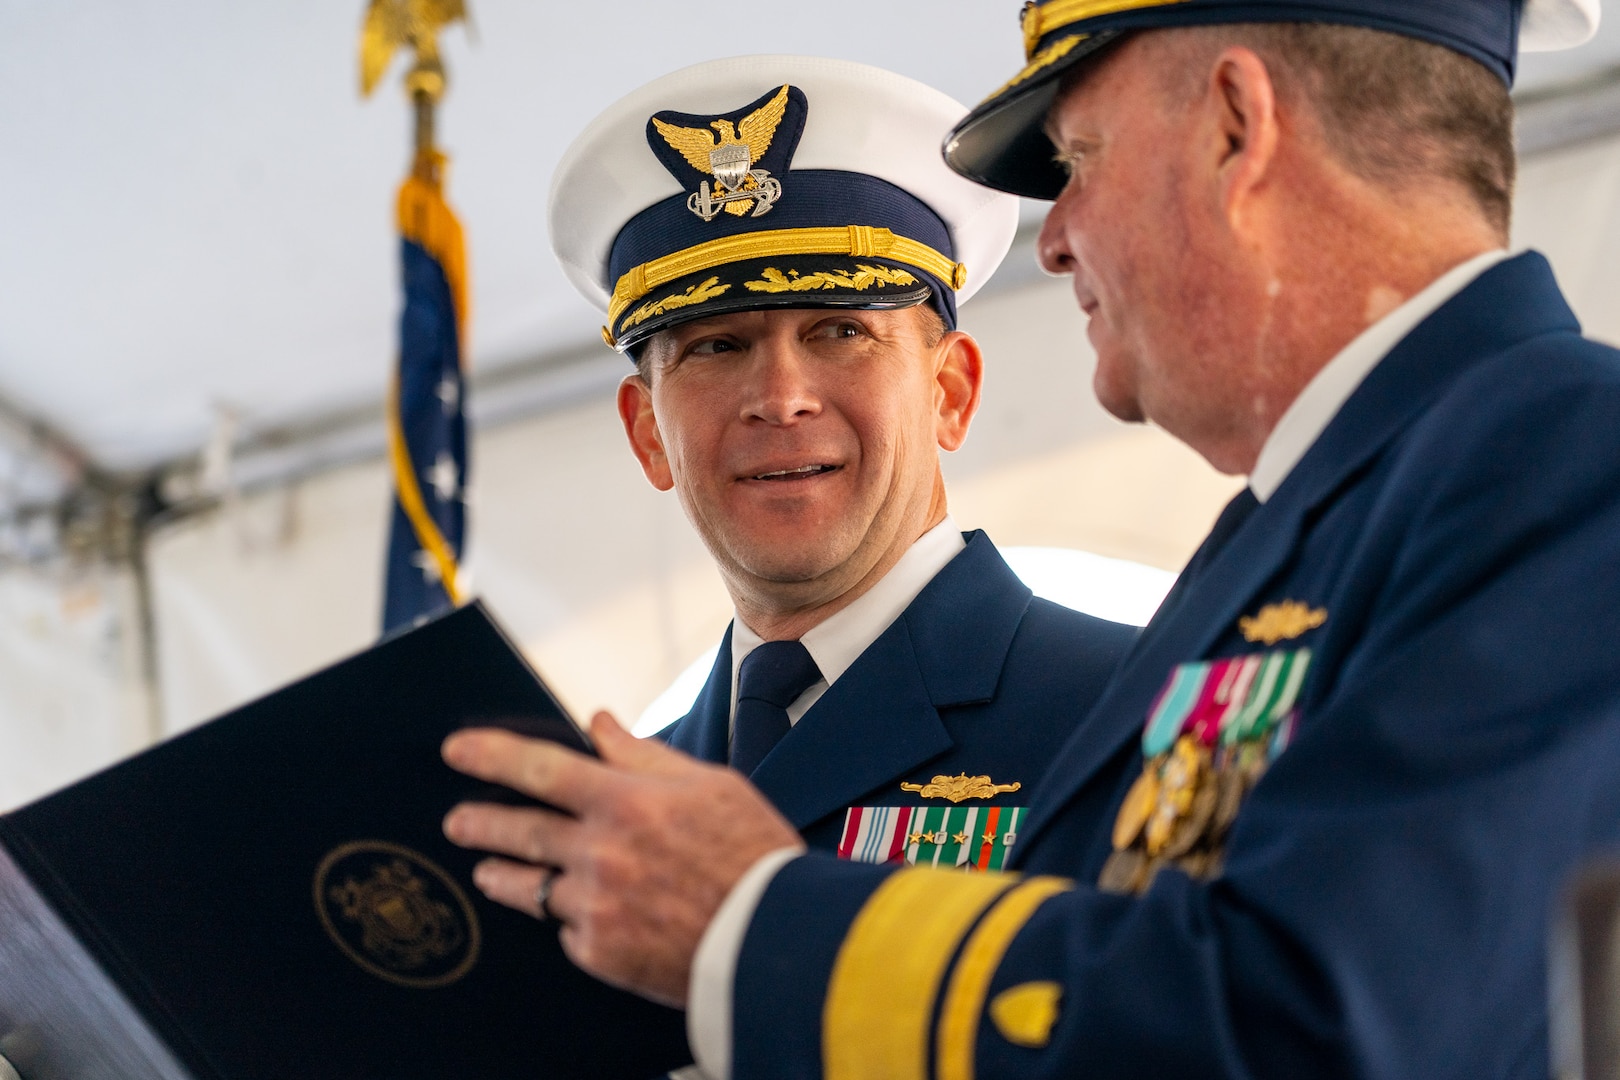 Rear Adm. Brendan McPherson, the deputy commander of Coast Guard Pacific Area, presents Cmdr. Brock S. Eckel, the commanding officer of USCGC Steadfast (WMEC 623), the Meritorious Service Medal during a decommissioning ceremony for Steadfast in Astoria, Oregon, Feb. 1, 2024. Steadfast was commissioned in 1968 and spent nearly 30 years in Astoria. (U.S. Coast Guard photo by Petty Officer 1st Class Travis Magee)